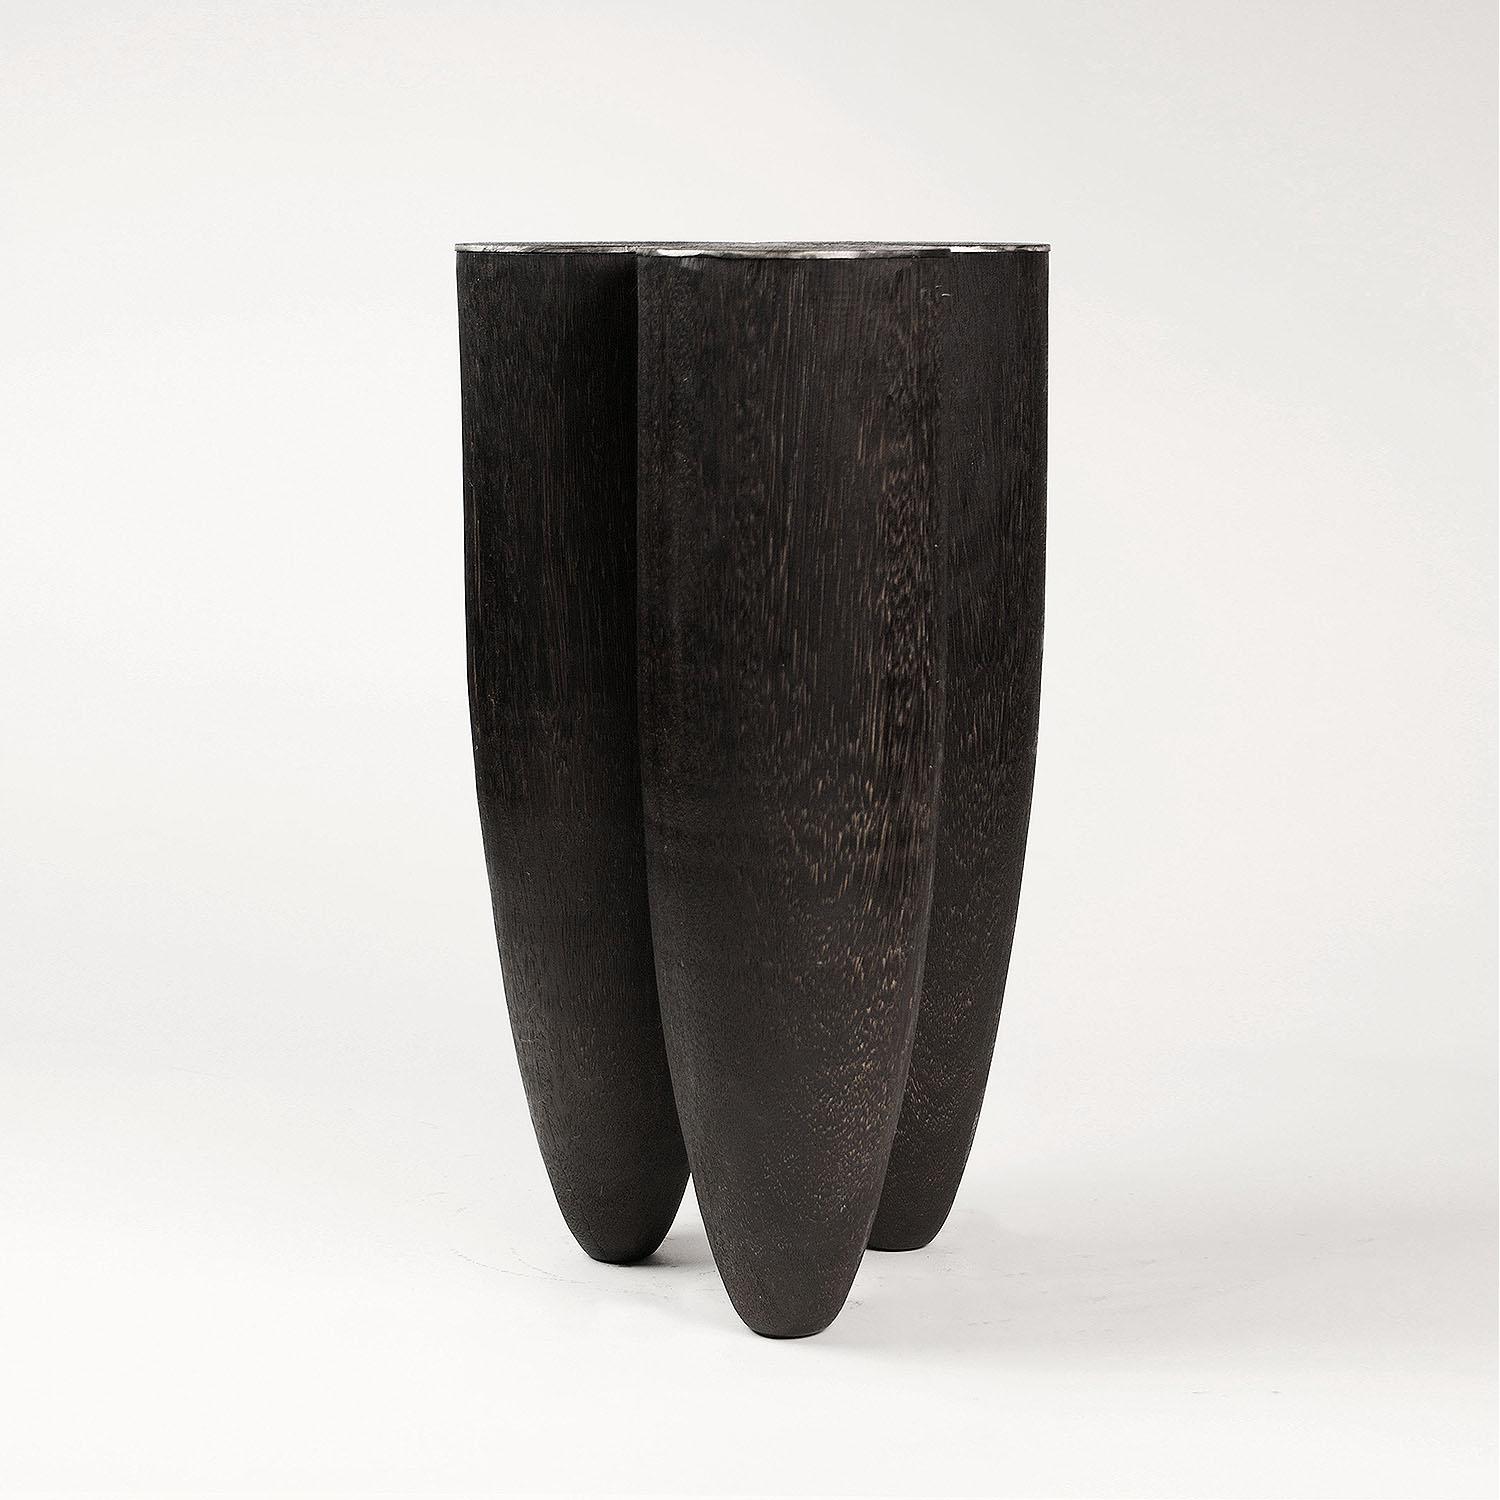 Modern Contemporary Black Stool in Iroko Wood, Senufo by Arno Declercq For Sale